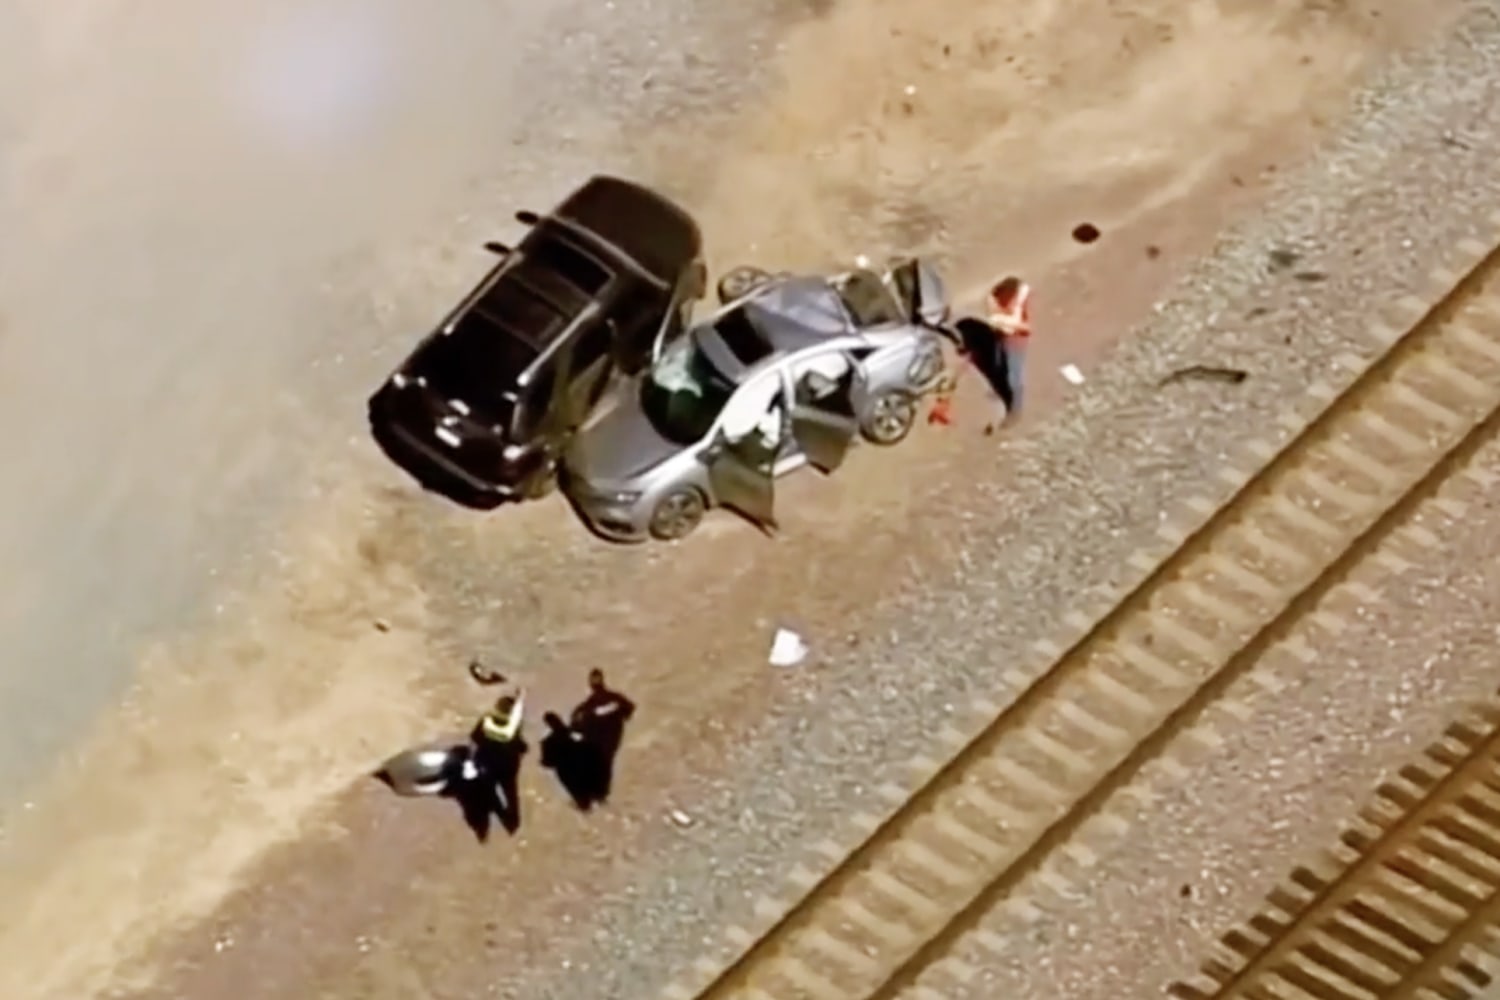 3 dead, 2 injured after Amtrak train crashes into car at California crossing